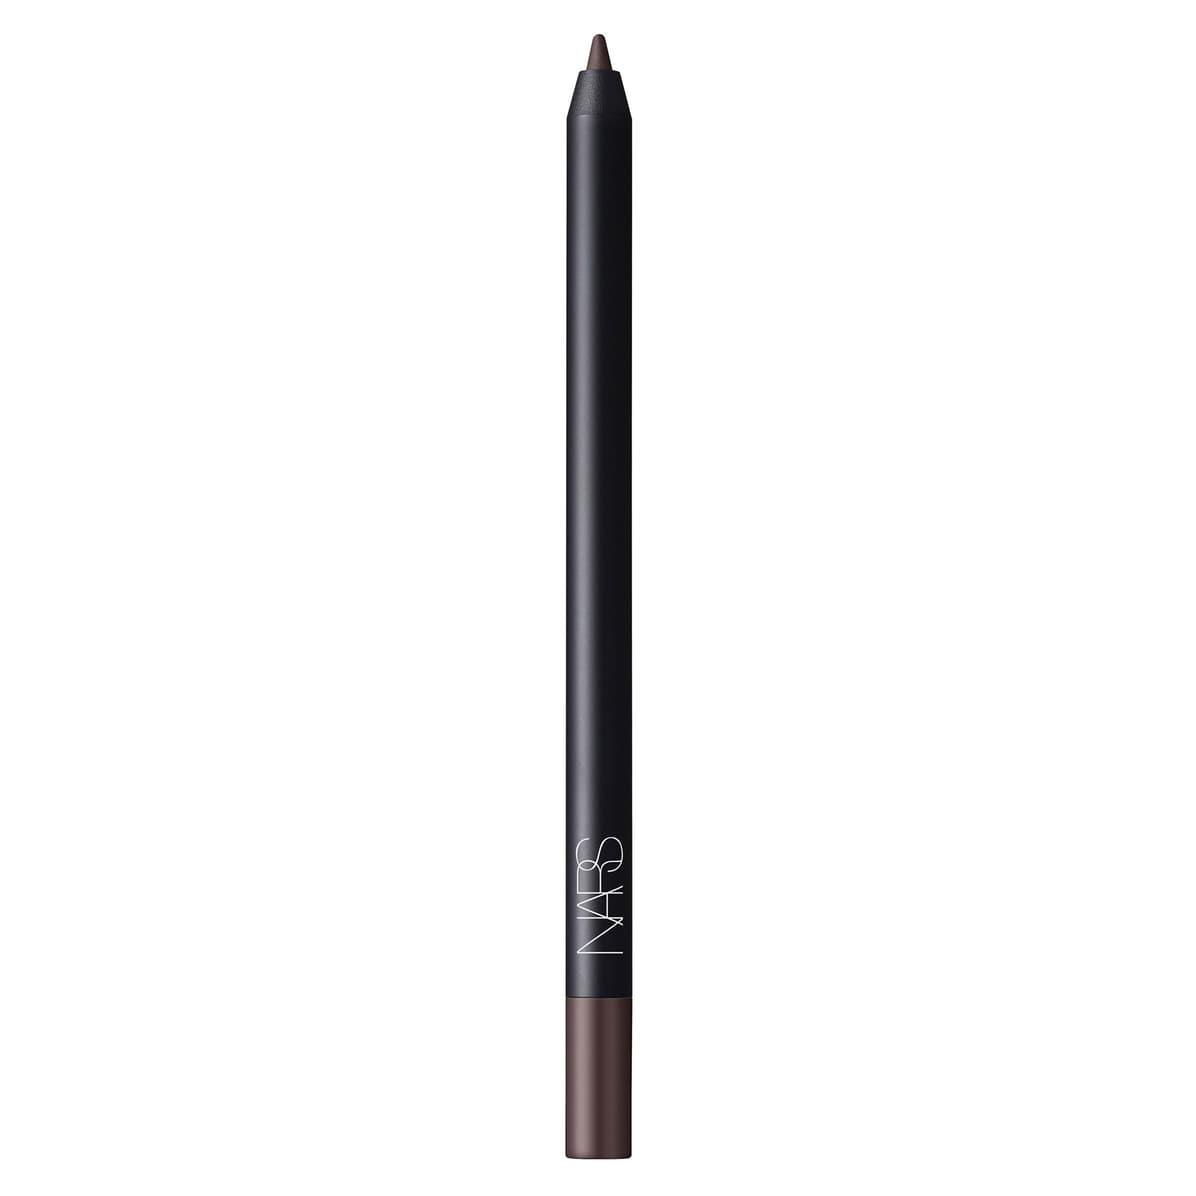 NARS Larger Than Life Long-Wear Eye Liner Last Frontier